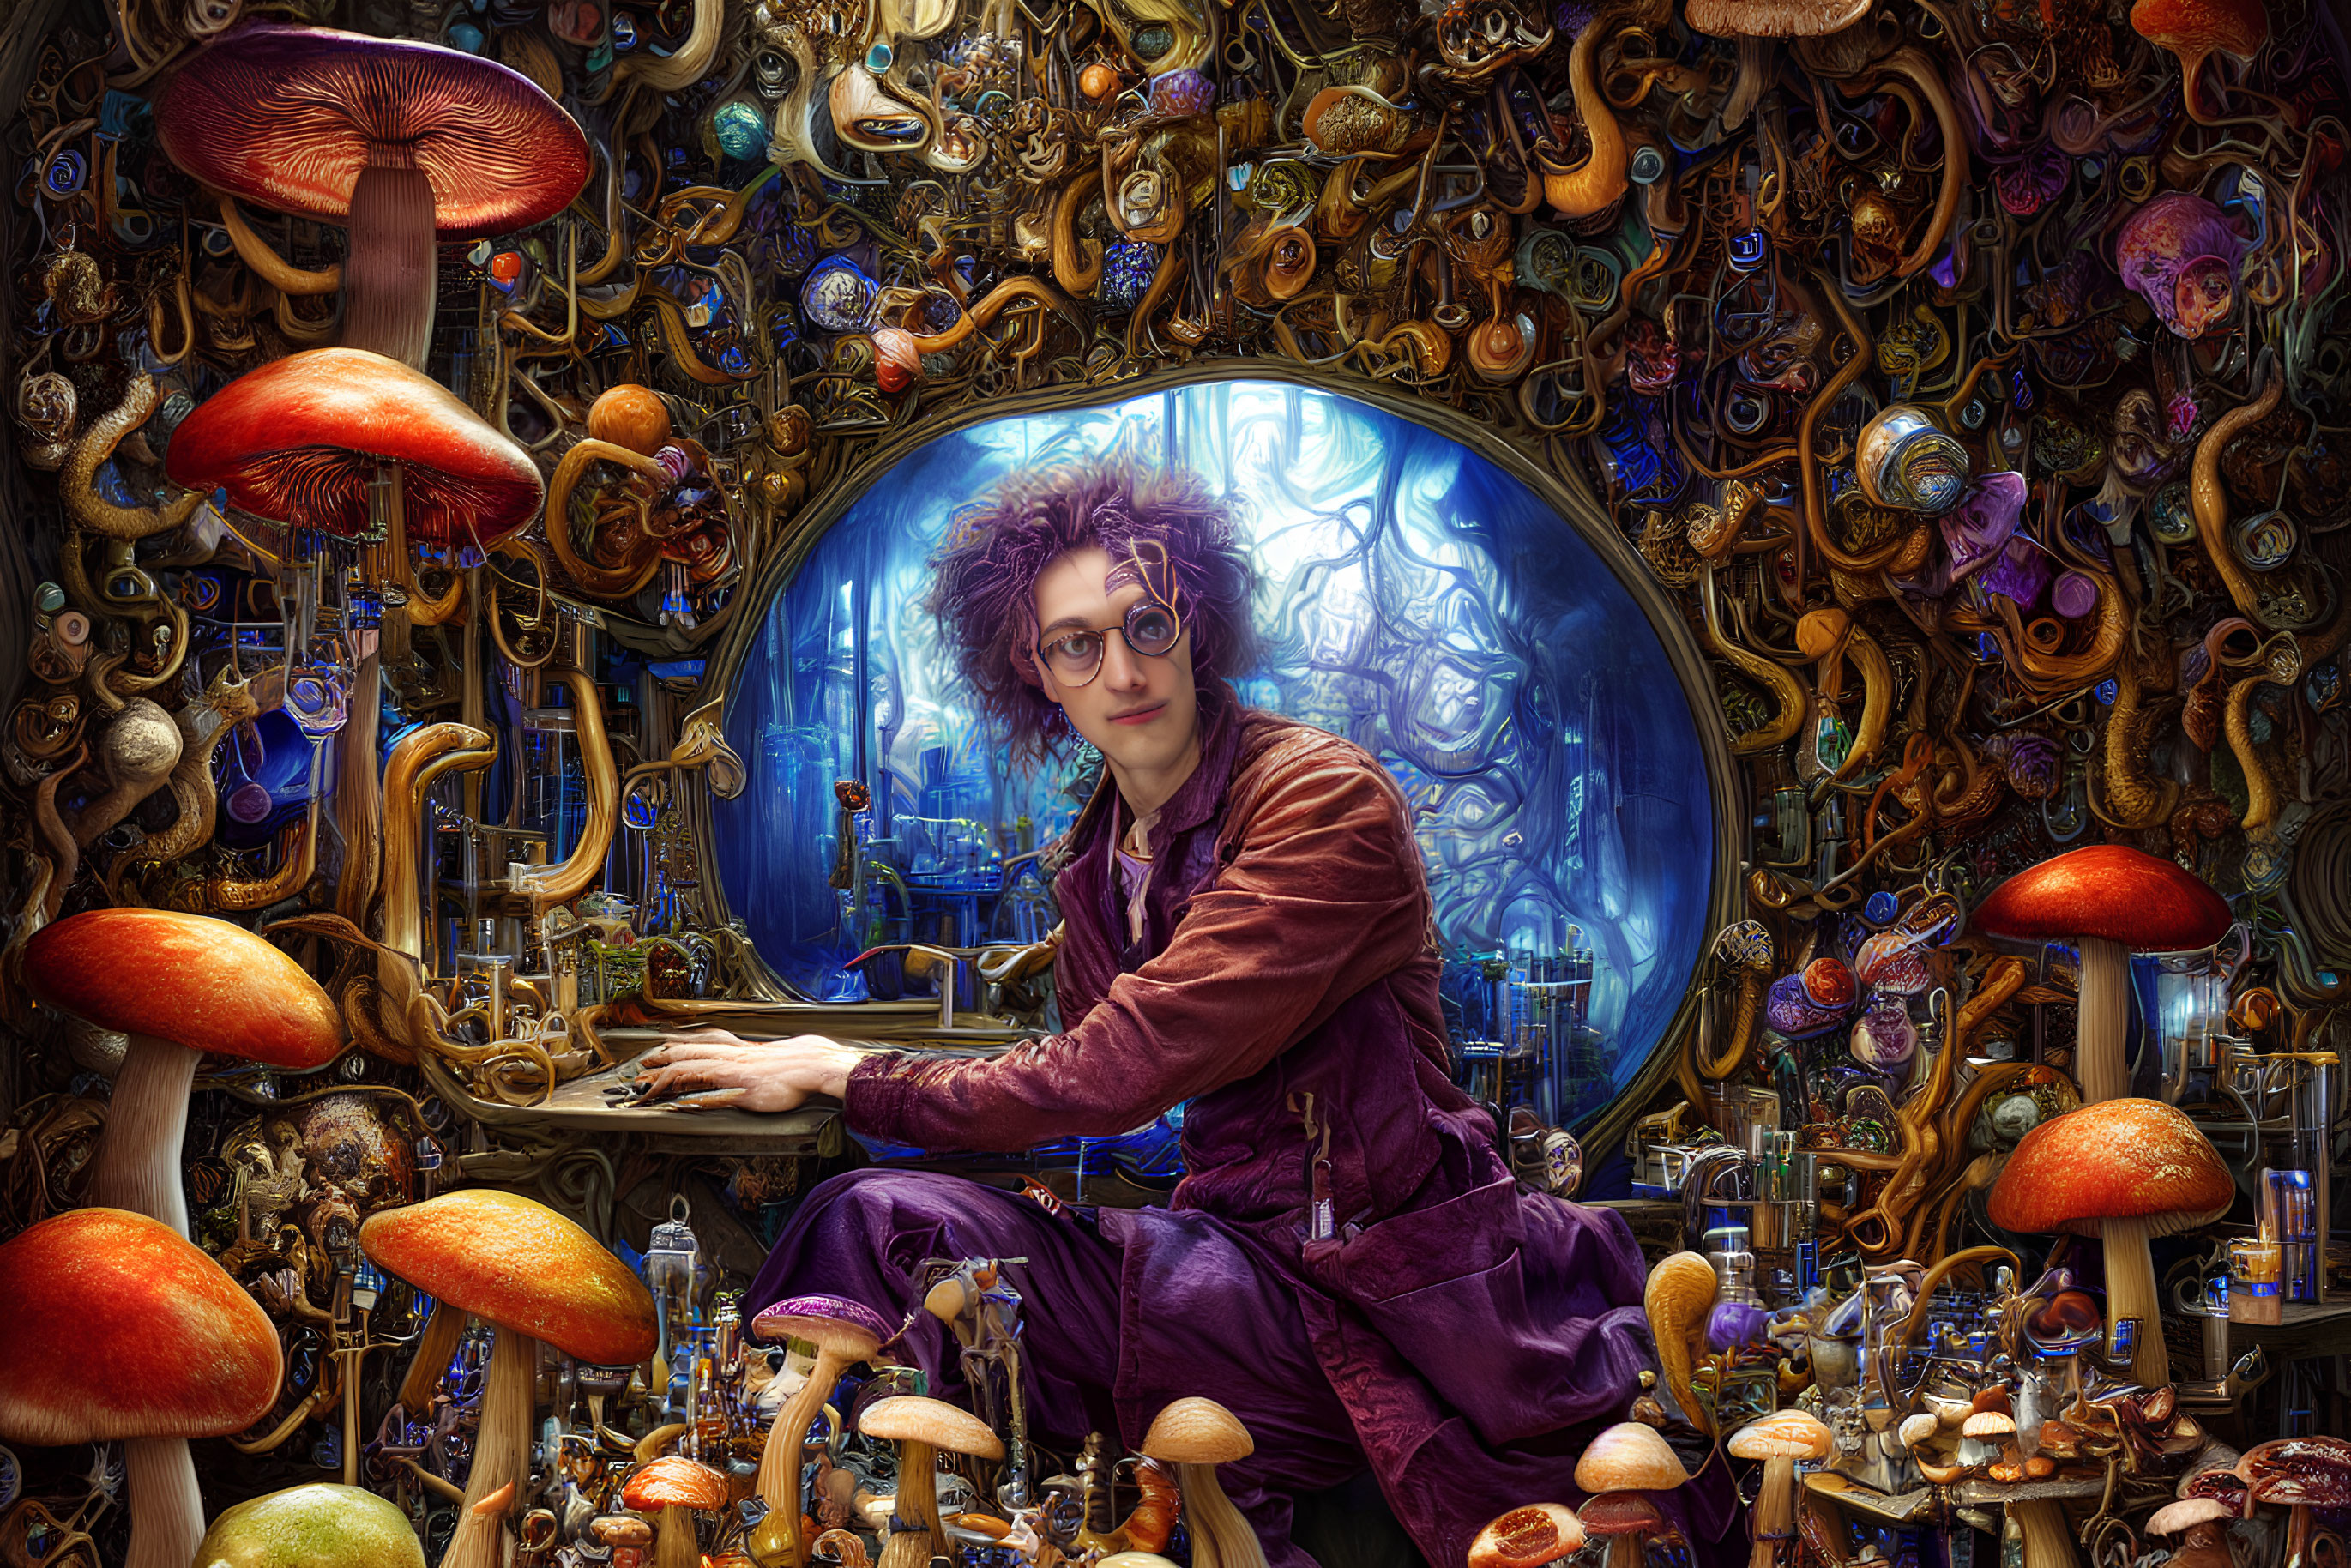 Curly-haired person in purple outfit with glasses among mushrooms and metallic objects